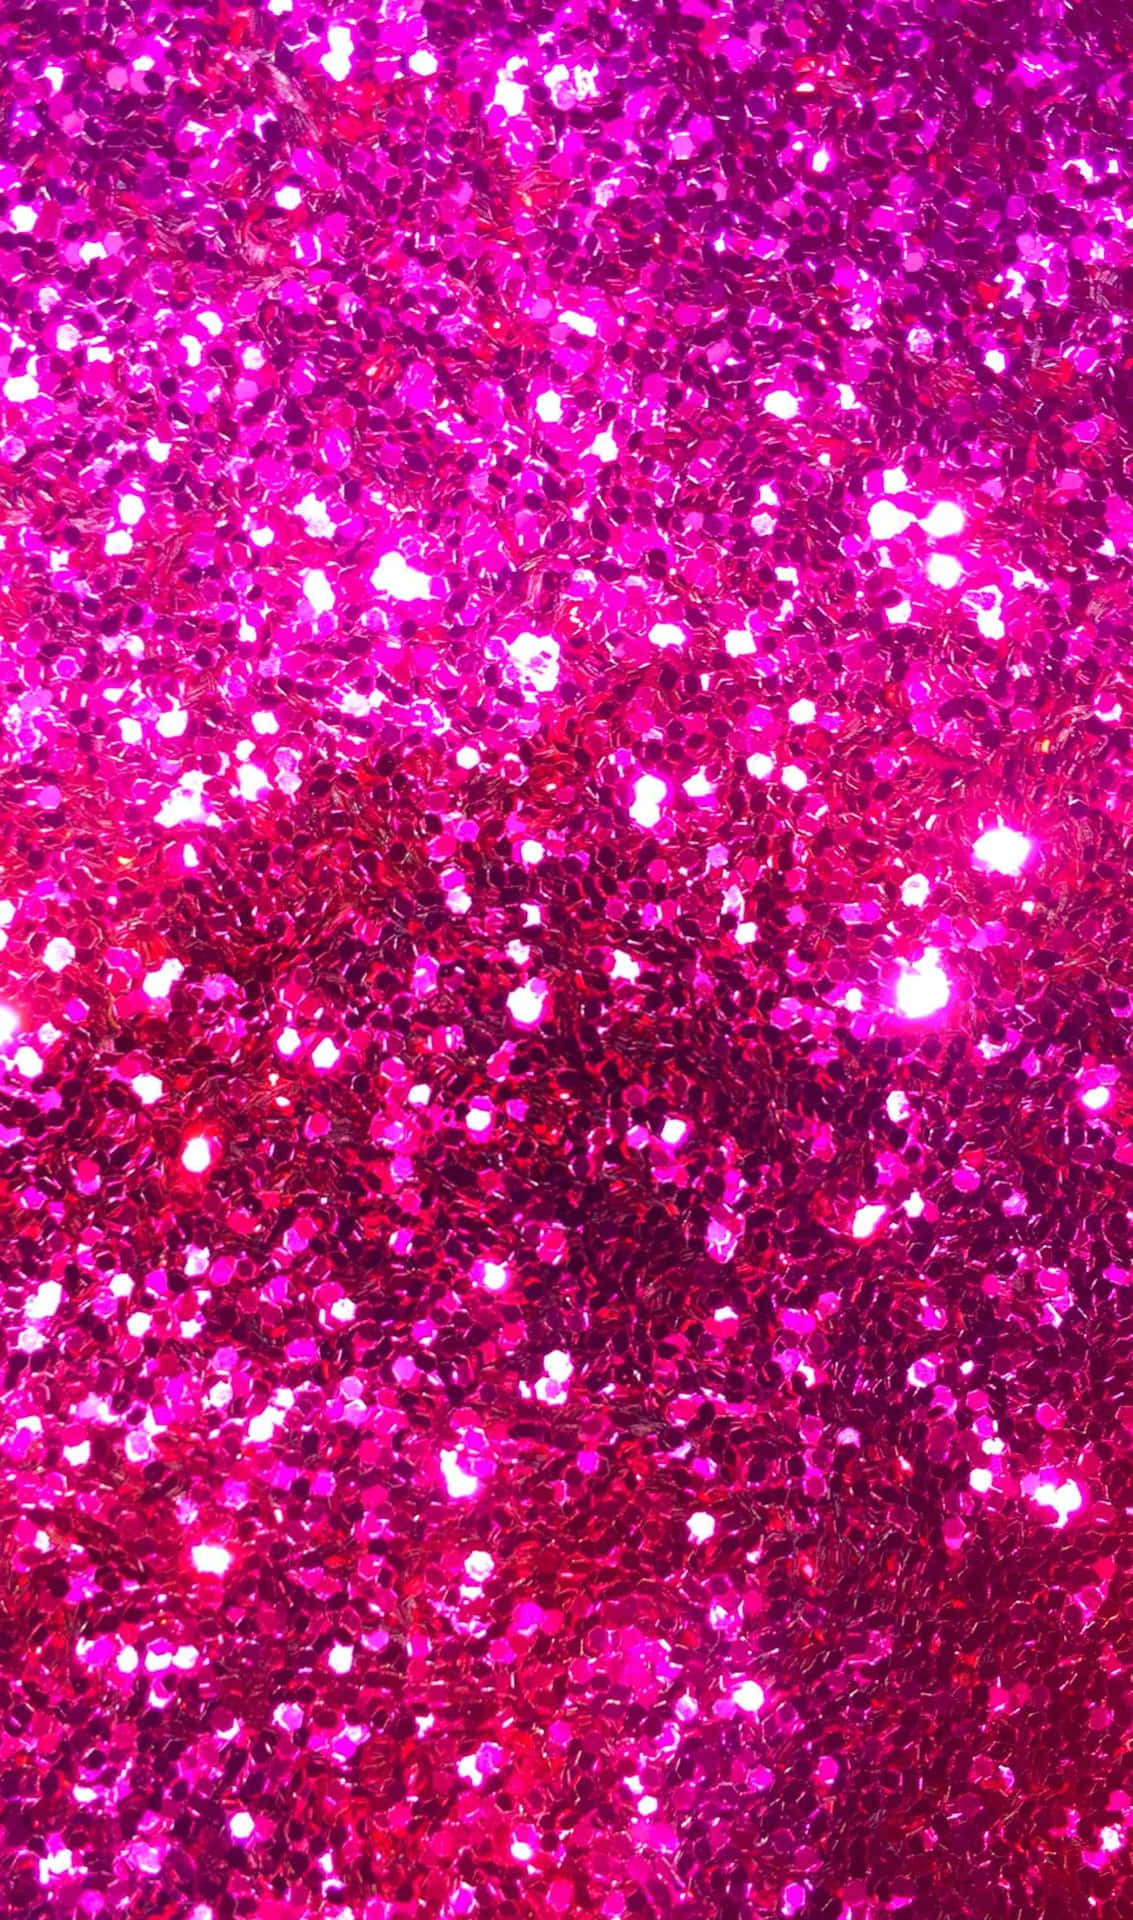 Download Pink And Black Glitter Shimmering Wallpaper | Wallpapers.com